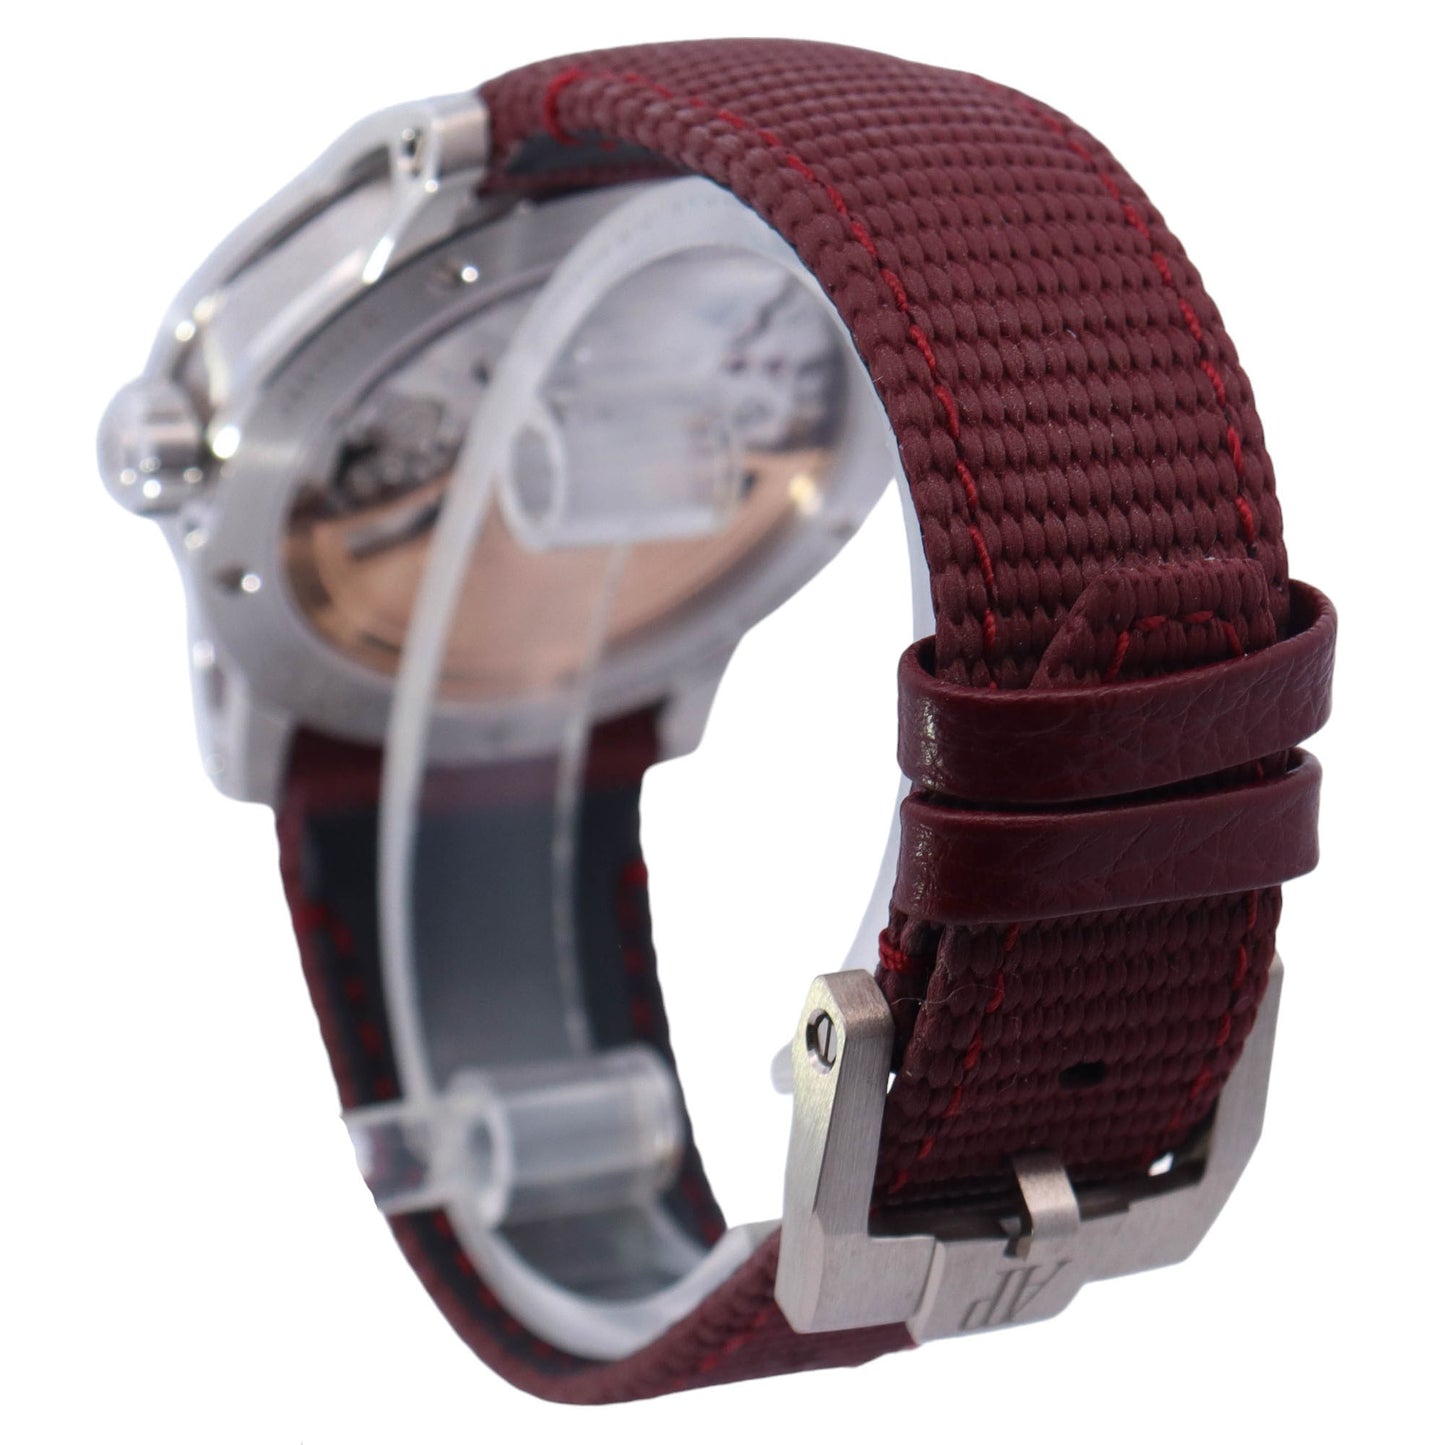 Audemars Piguet Code 11.59 White Gold 41mm Dark Red Arabic & Stick Dial Watch Reference# 15210BC.OO.A068CR.01